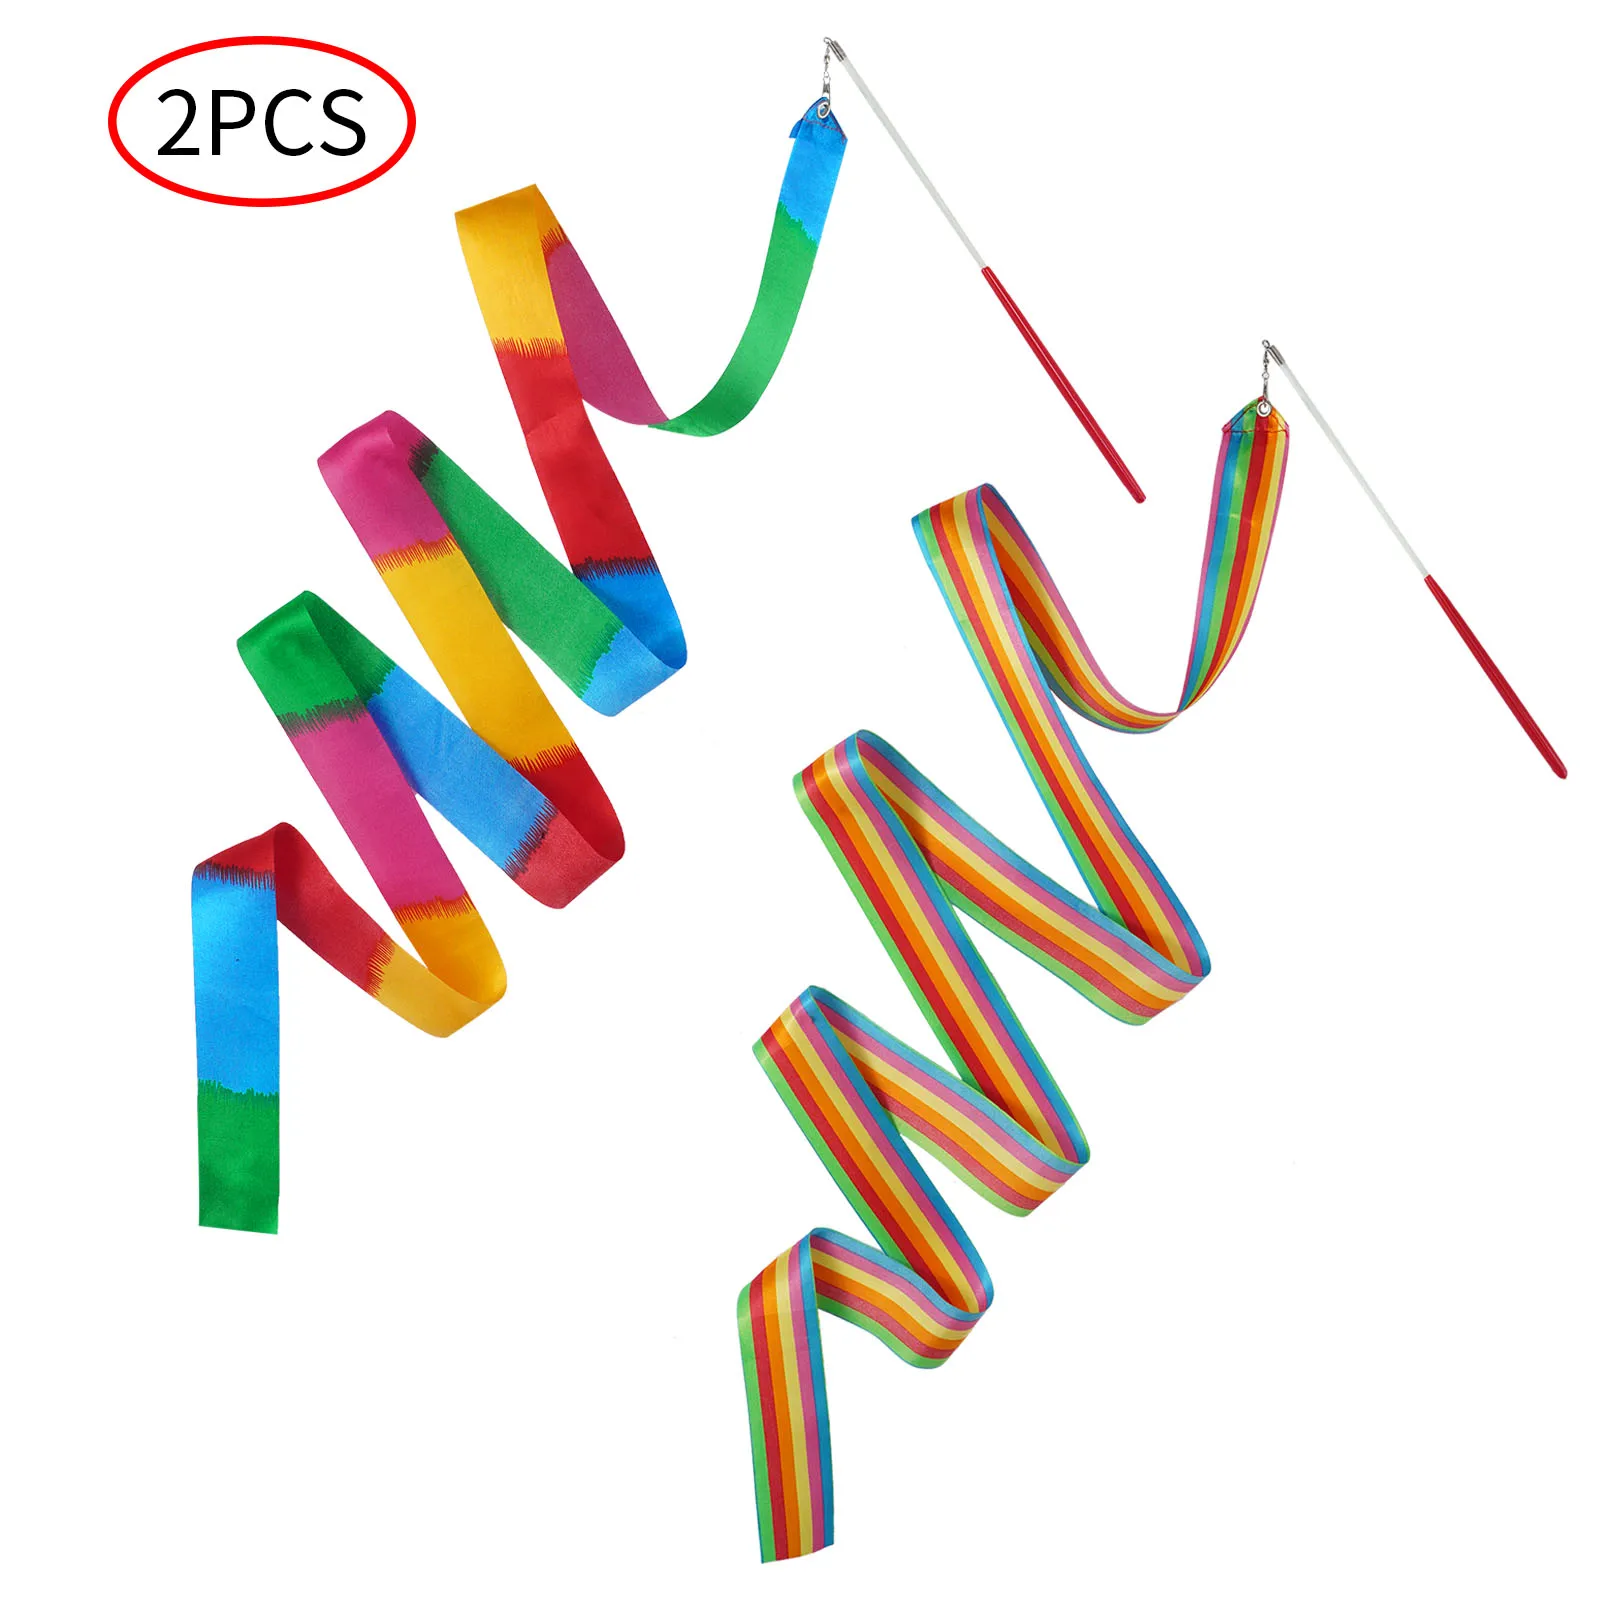 2 Pcs 2M Gymnastics Ribbons Brightly Colored Art Dance Streamers for Children 